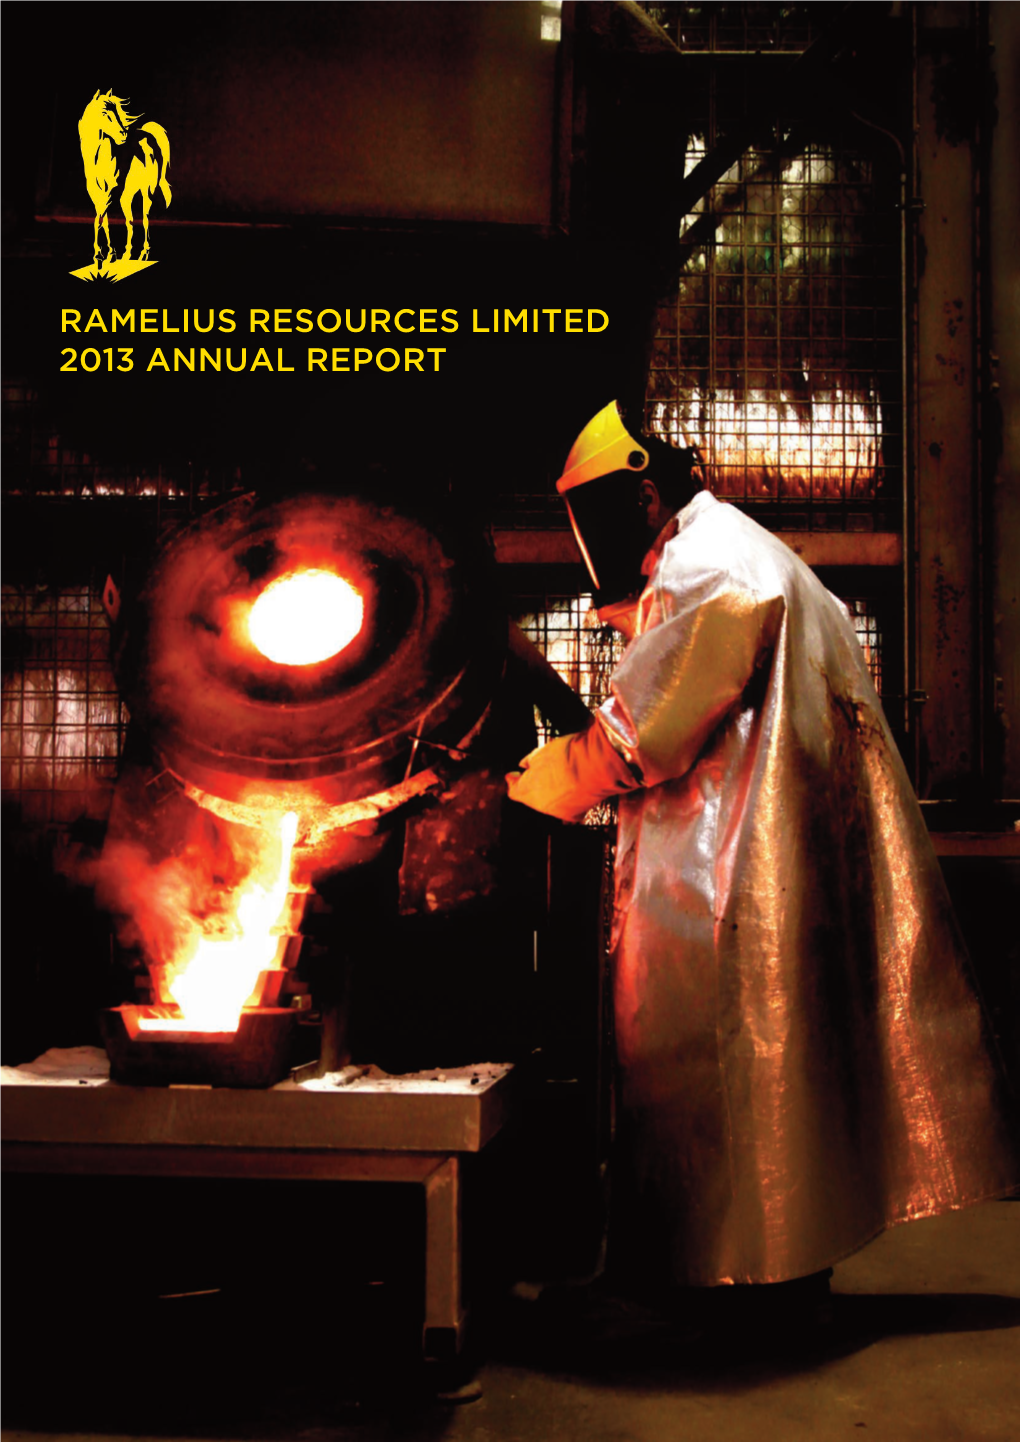 Ramelius Resources Limited 2013 Annual Report Contents